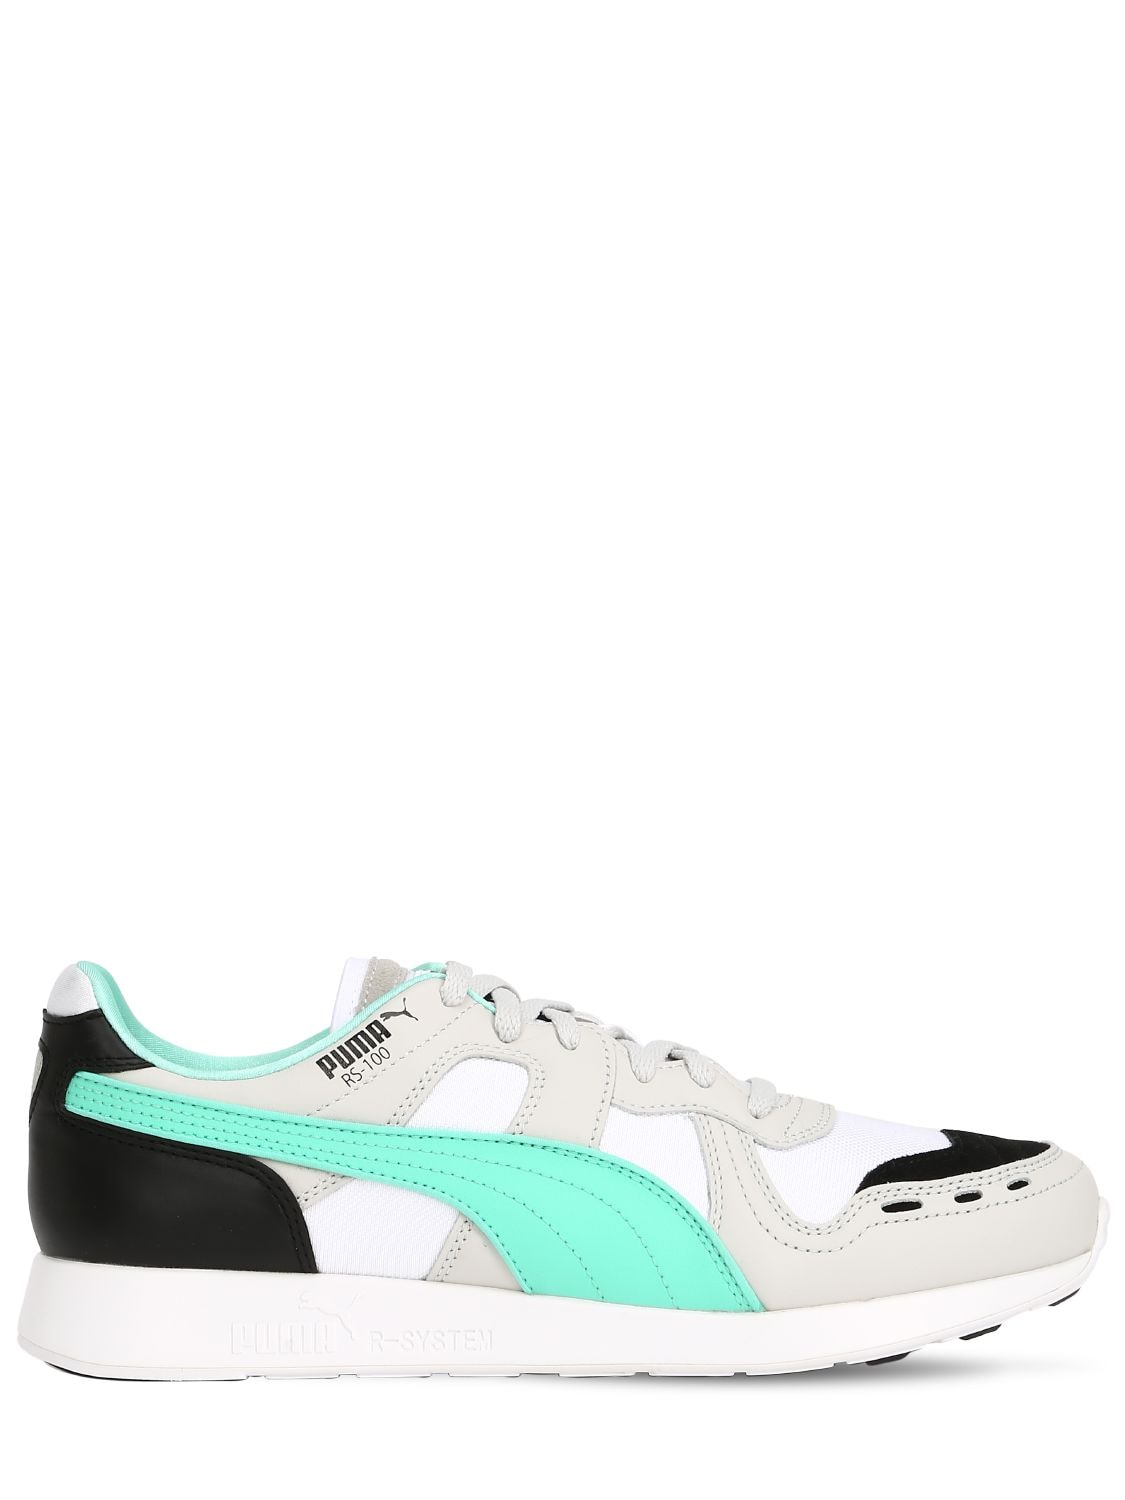 PUMA RS-100 RE-INVENTION SNEAKERS,68I0II008-MDE1